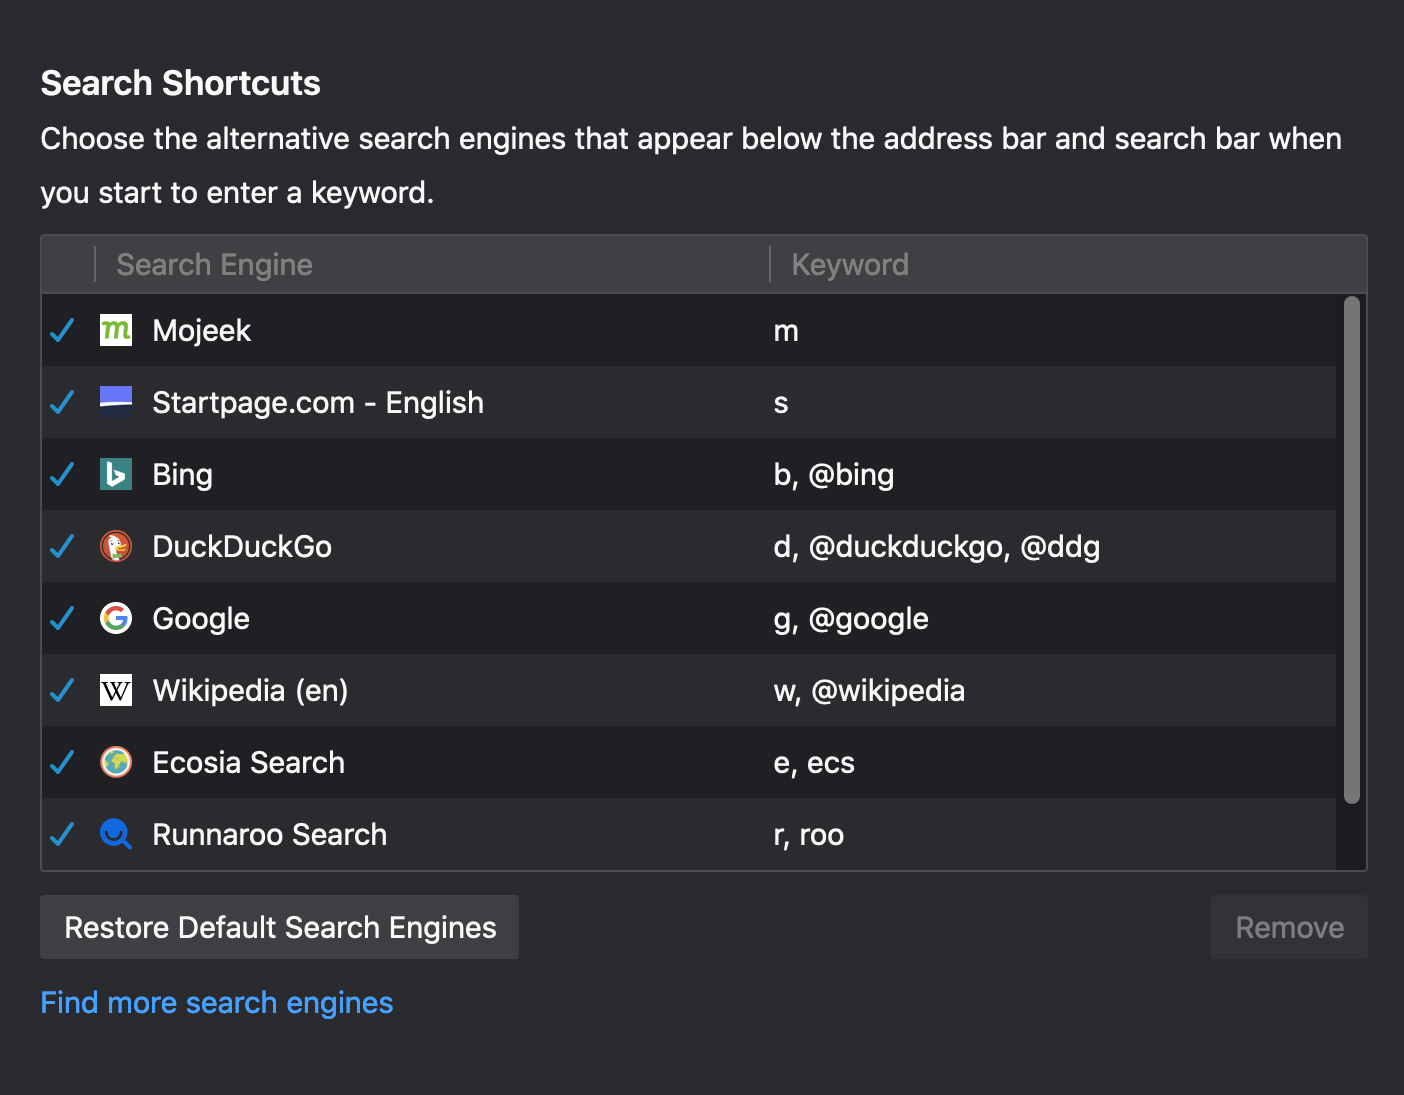 the search shortcuts box in Firefox, complete with search engines like Mojeek, DuckDuckGo, and Google, with keywords assigned to them